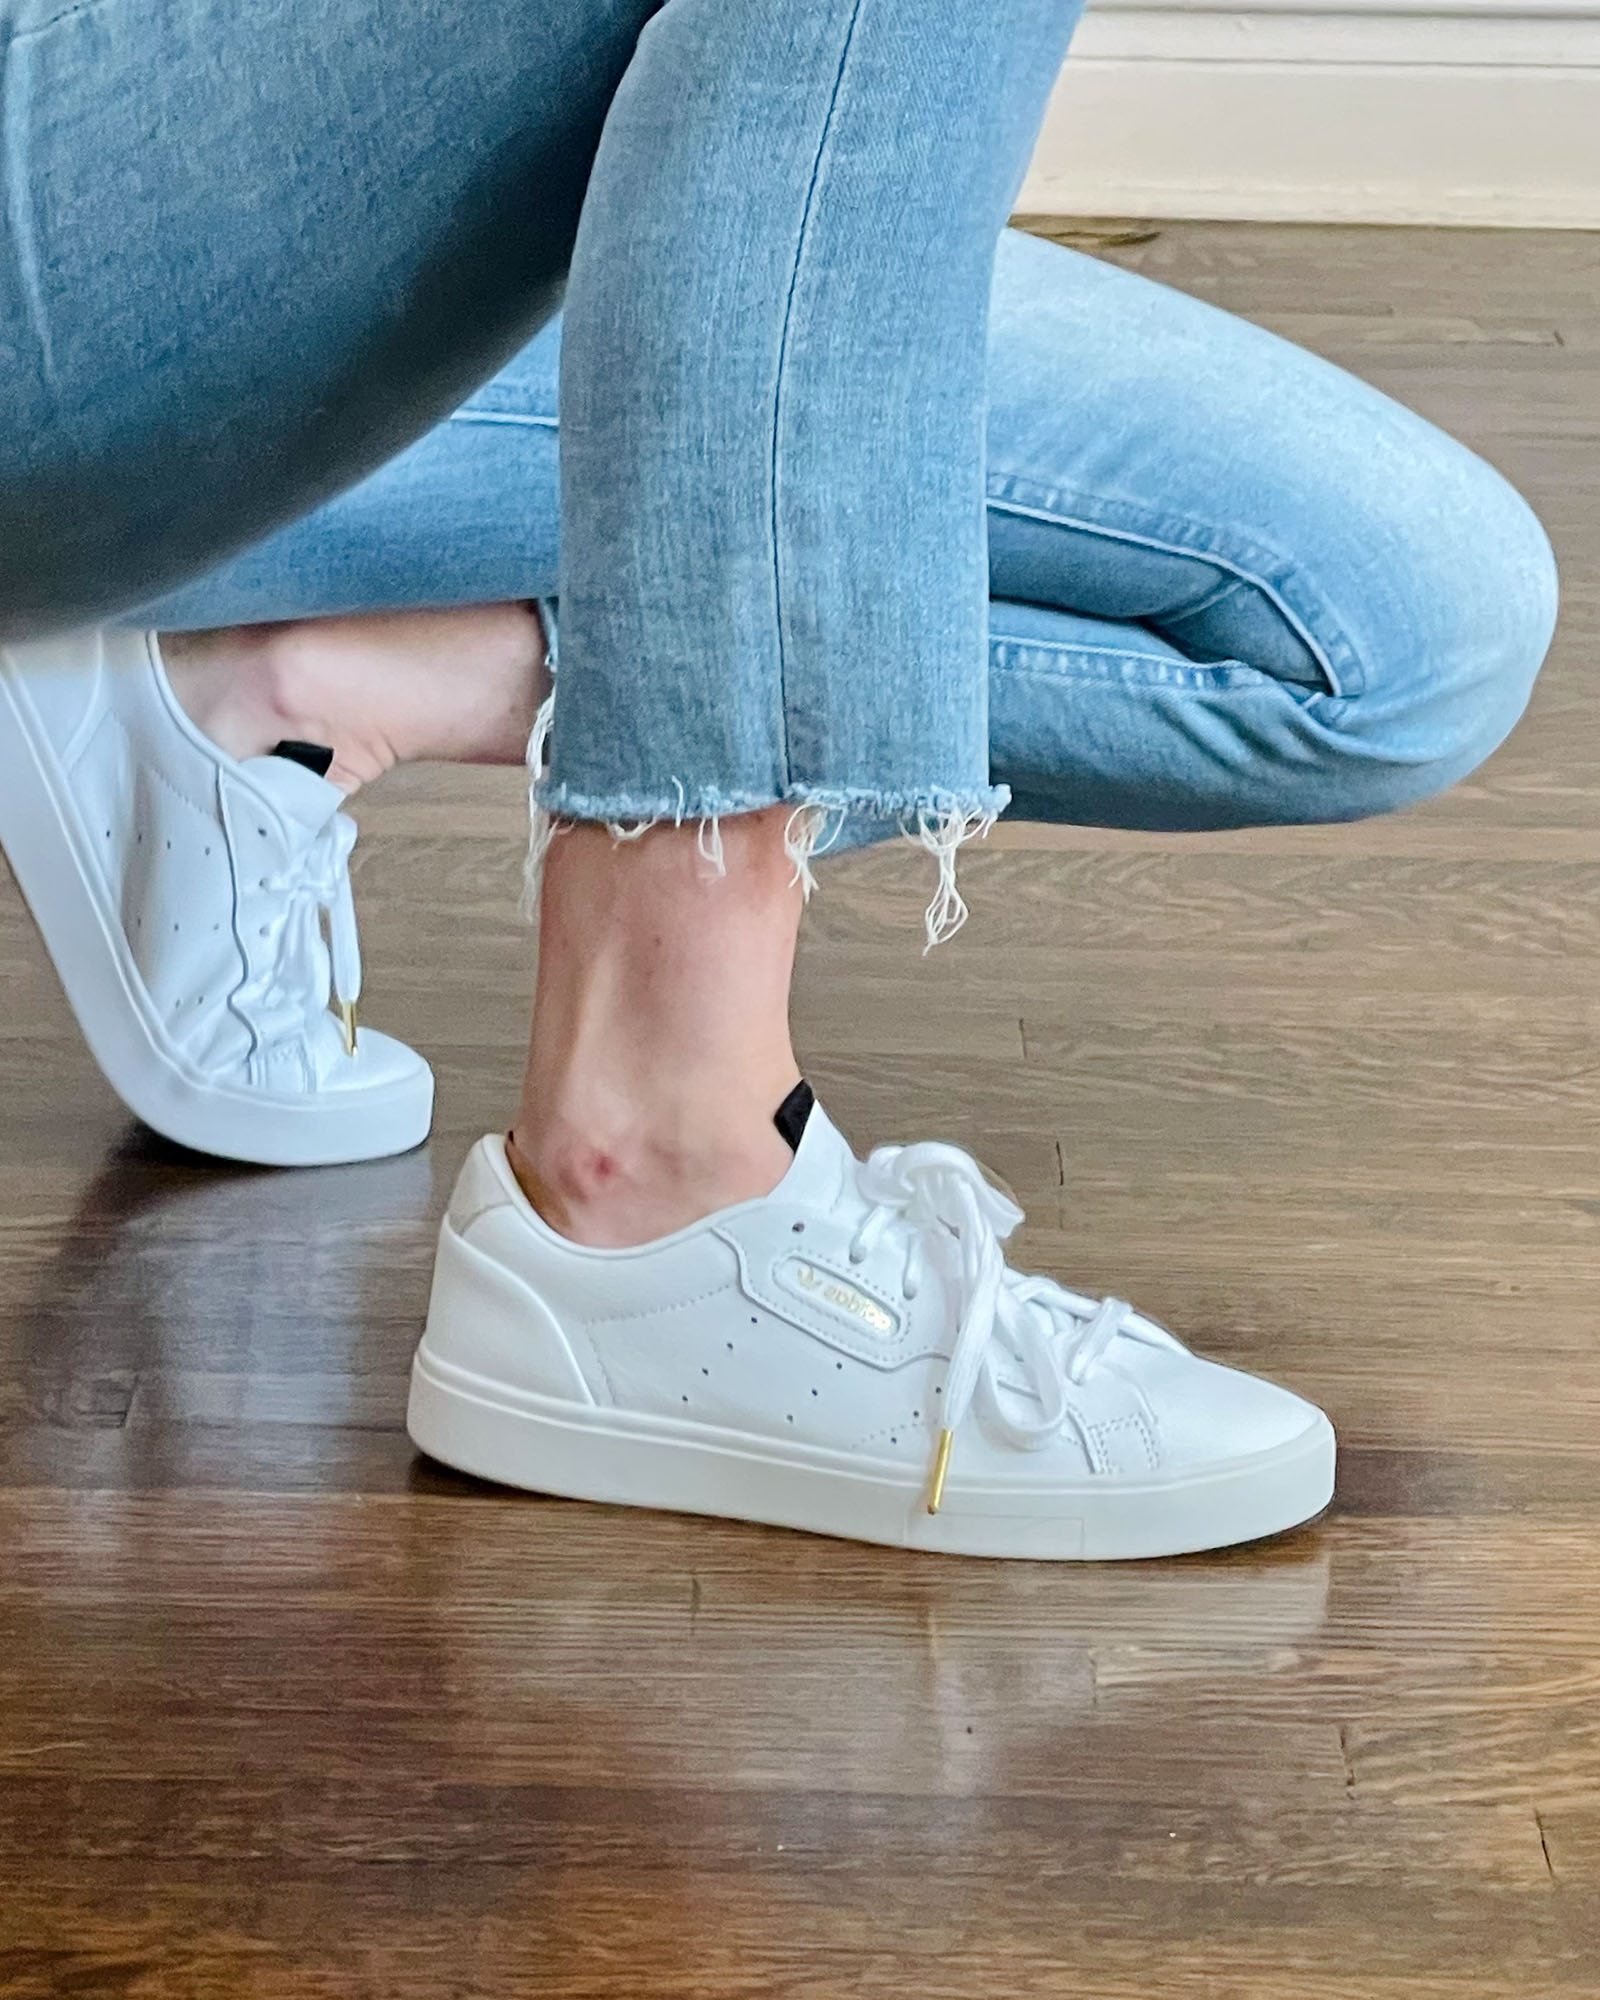 Showing the Adidas Sleek sneakers in white.